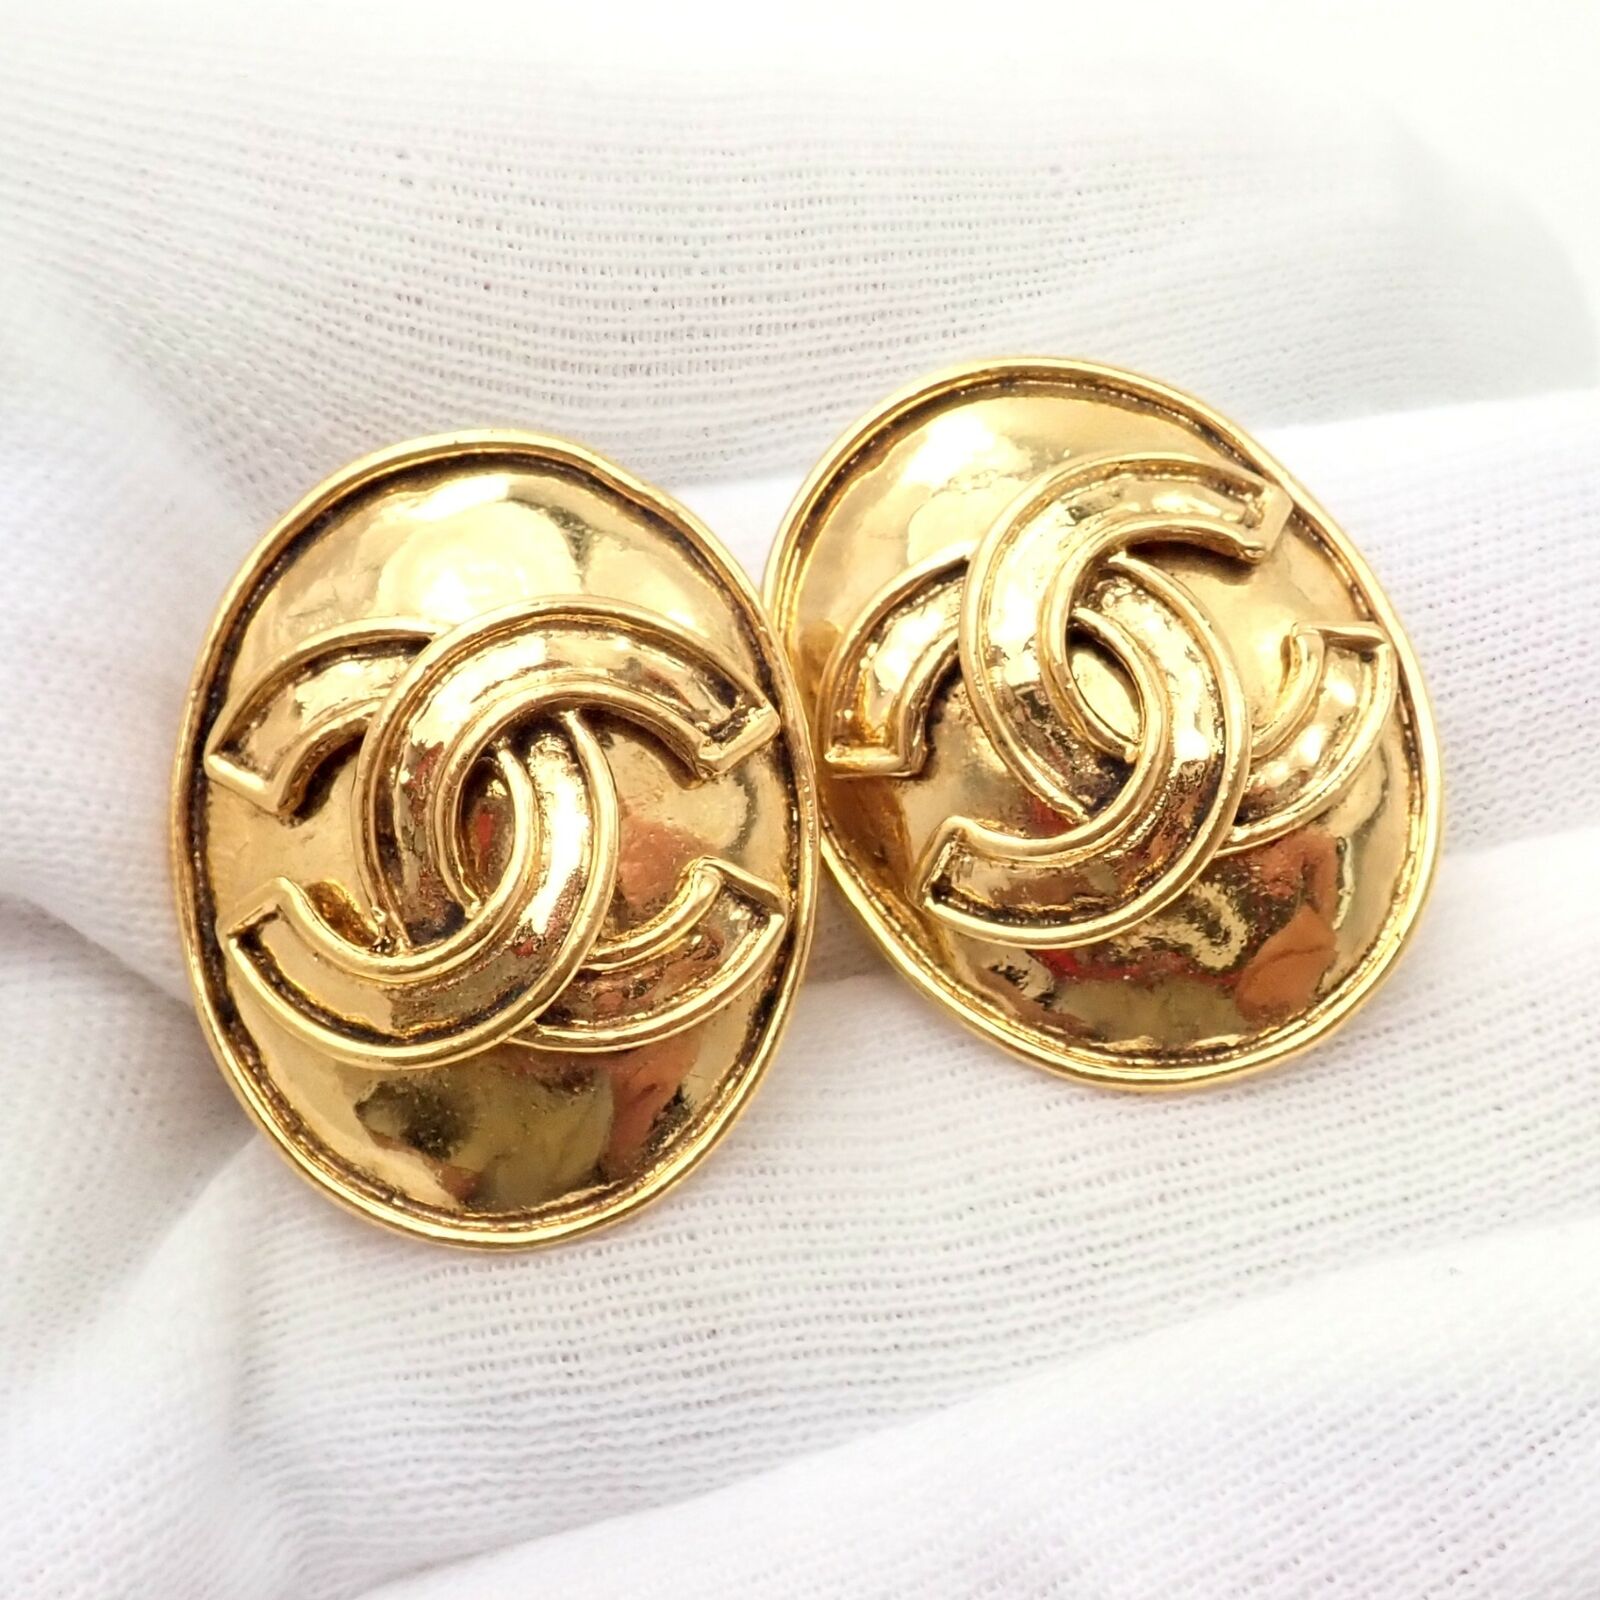 Other jewelry NEW CHANEL LOGO CC  STRASS A BROOCH64746 IN GOLD METAL NEW  GOLDEN BROOCH ref543096  Joli Closet